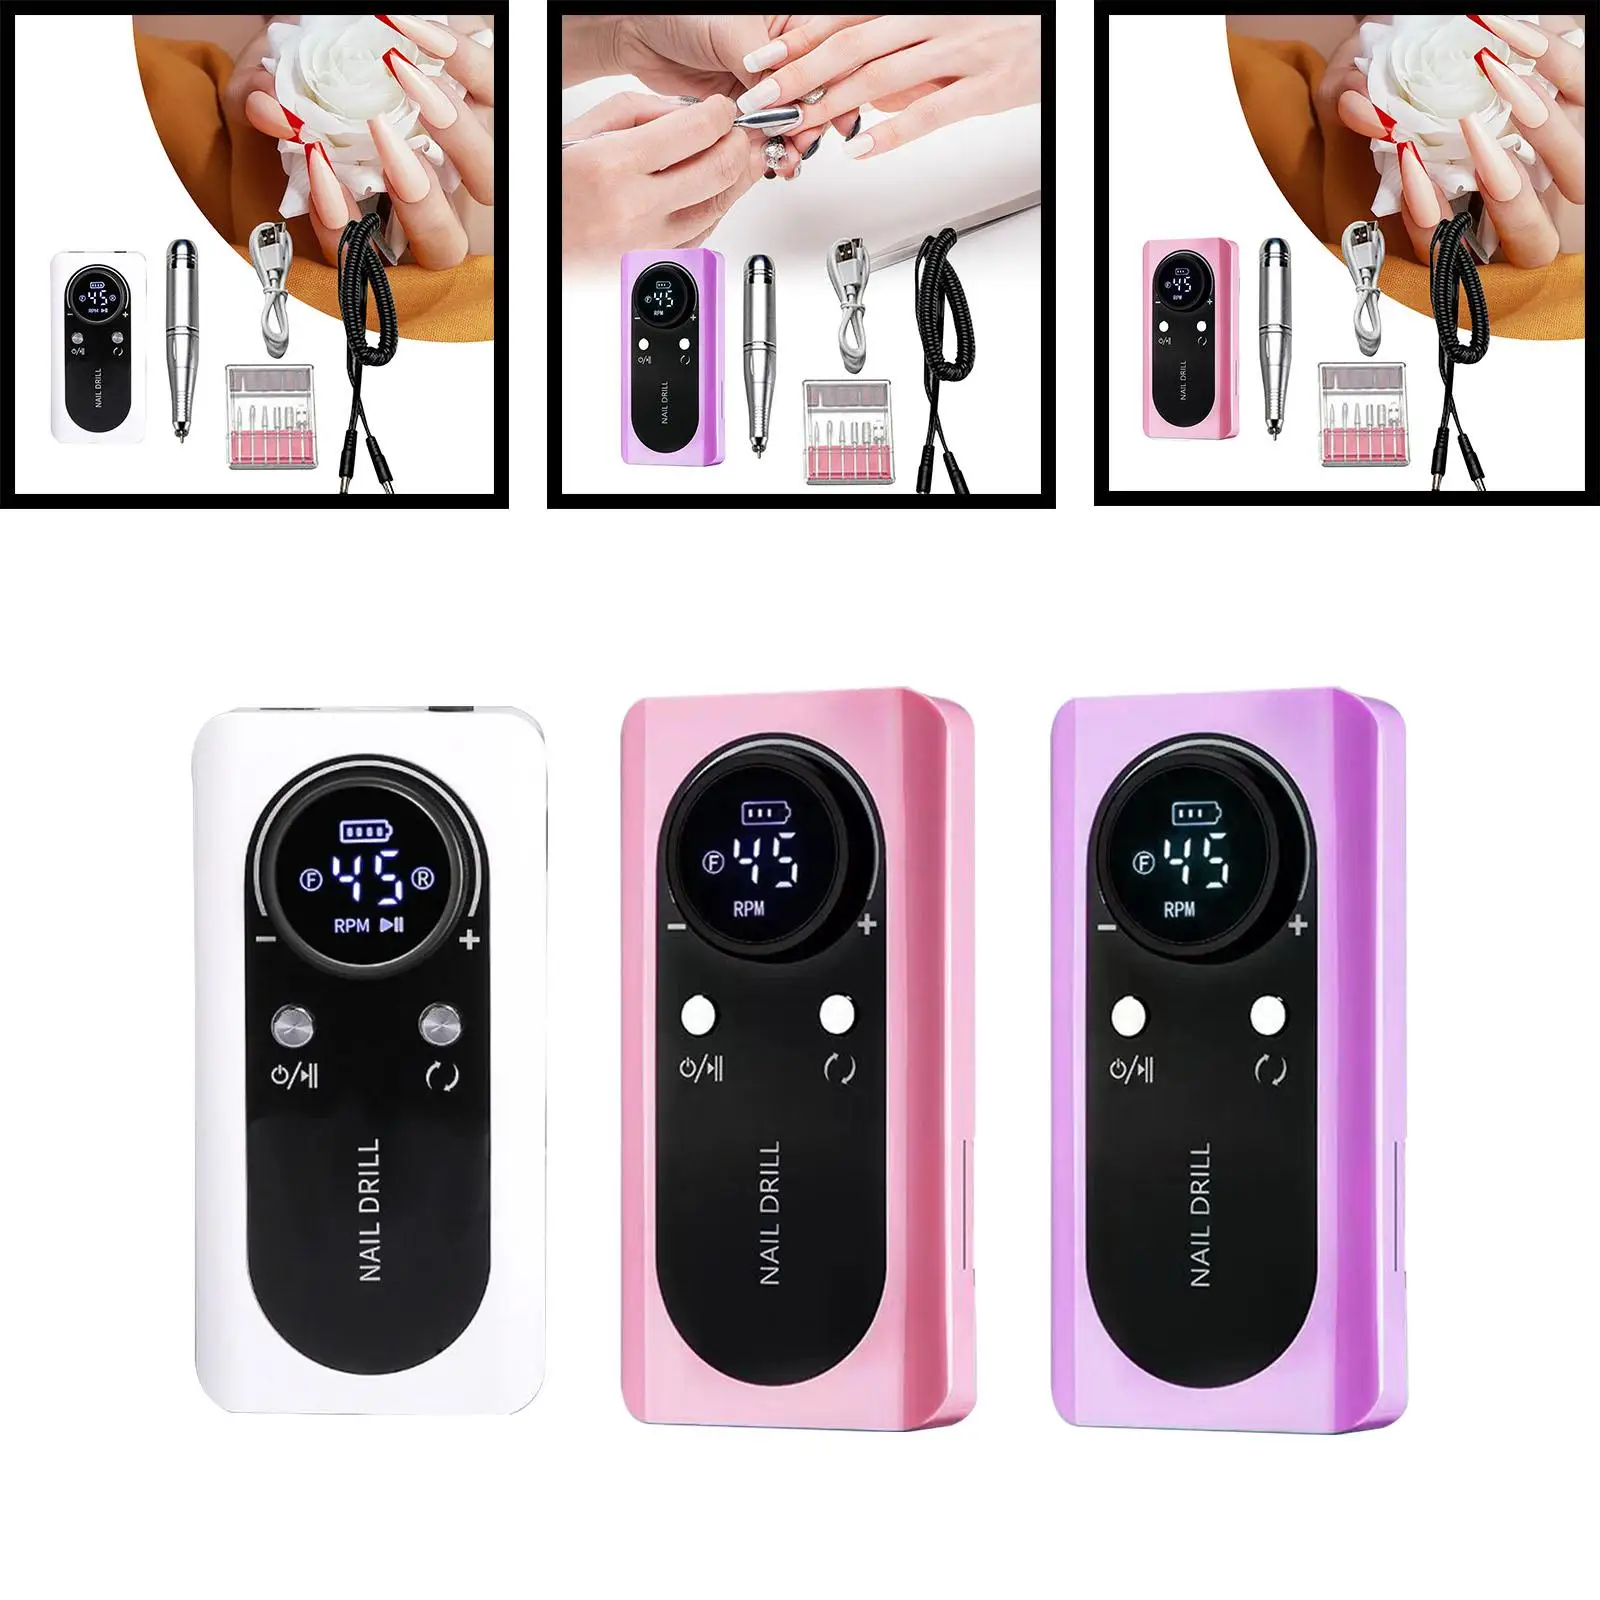 Electric Nail Drill Machine with Nail Bits, Rechargeable Nail File Manicure Pedicure Kits for Trimming